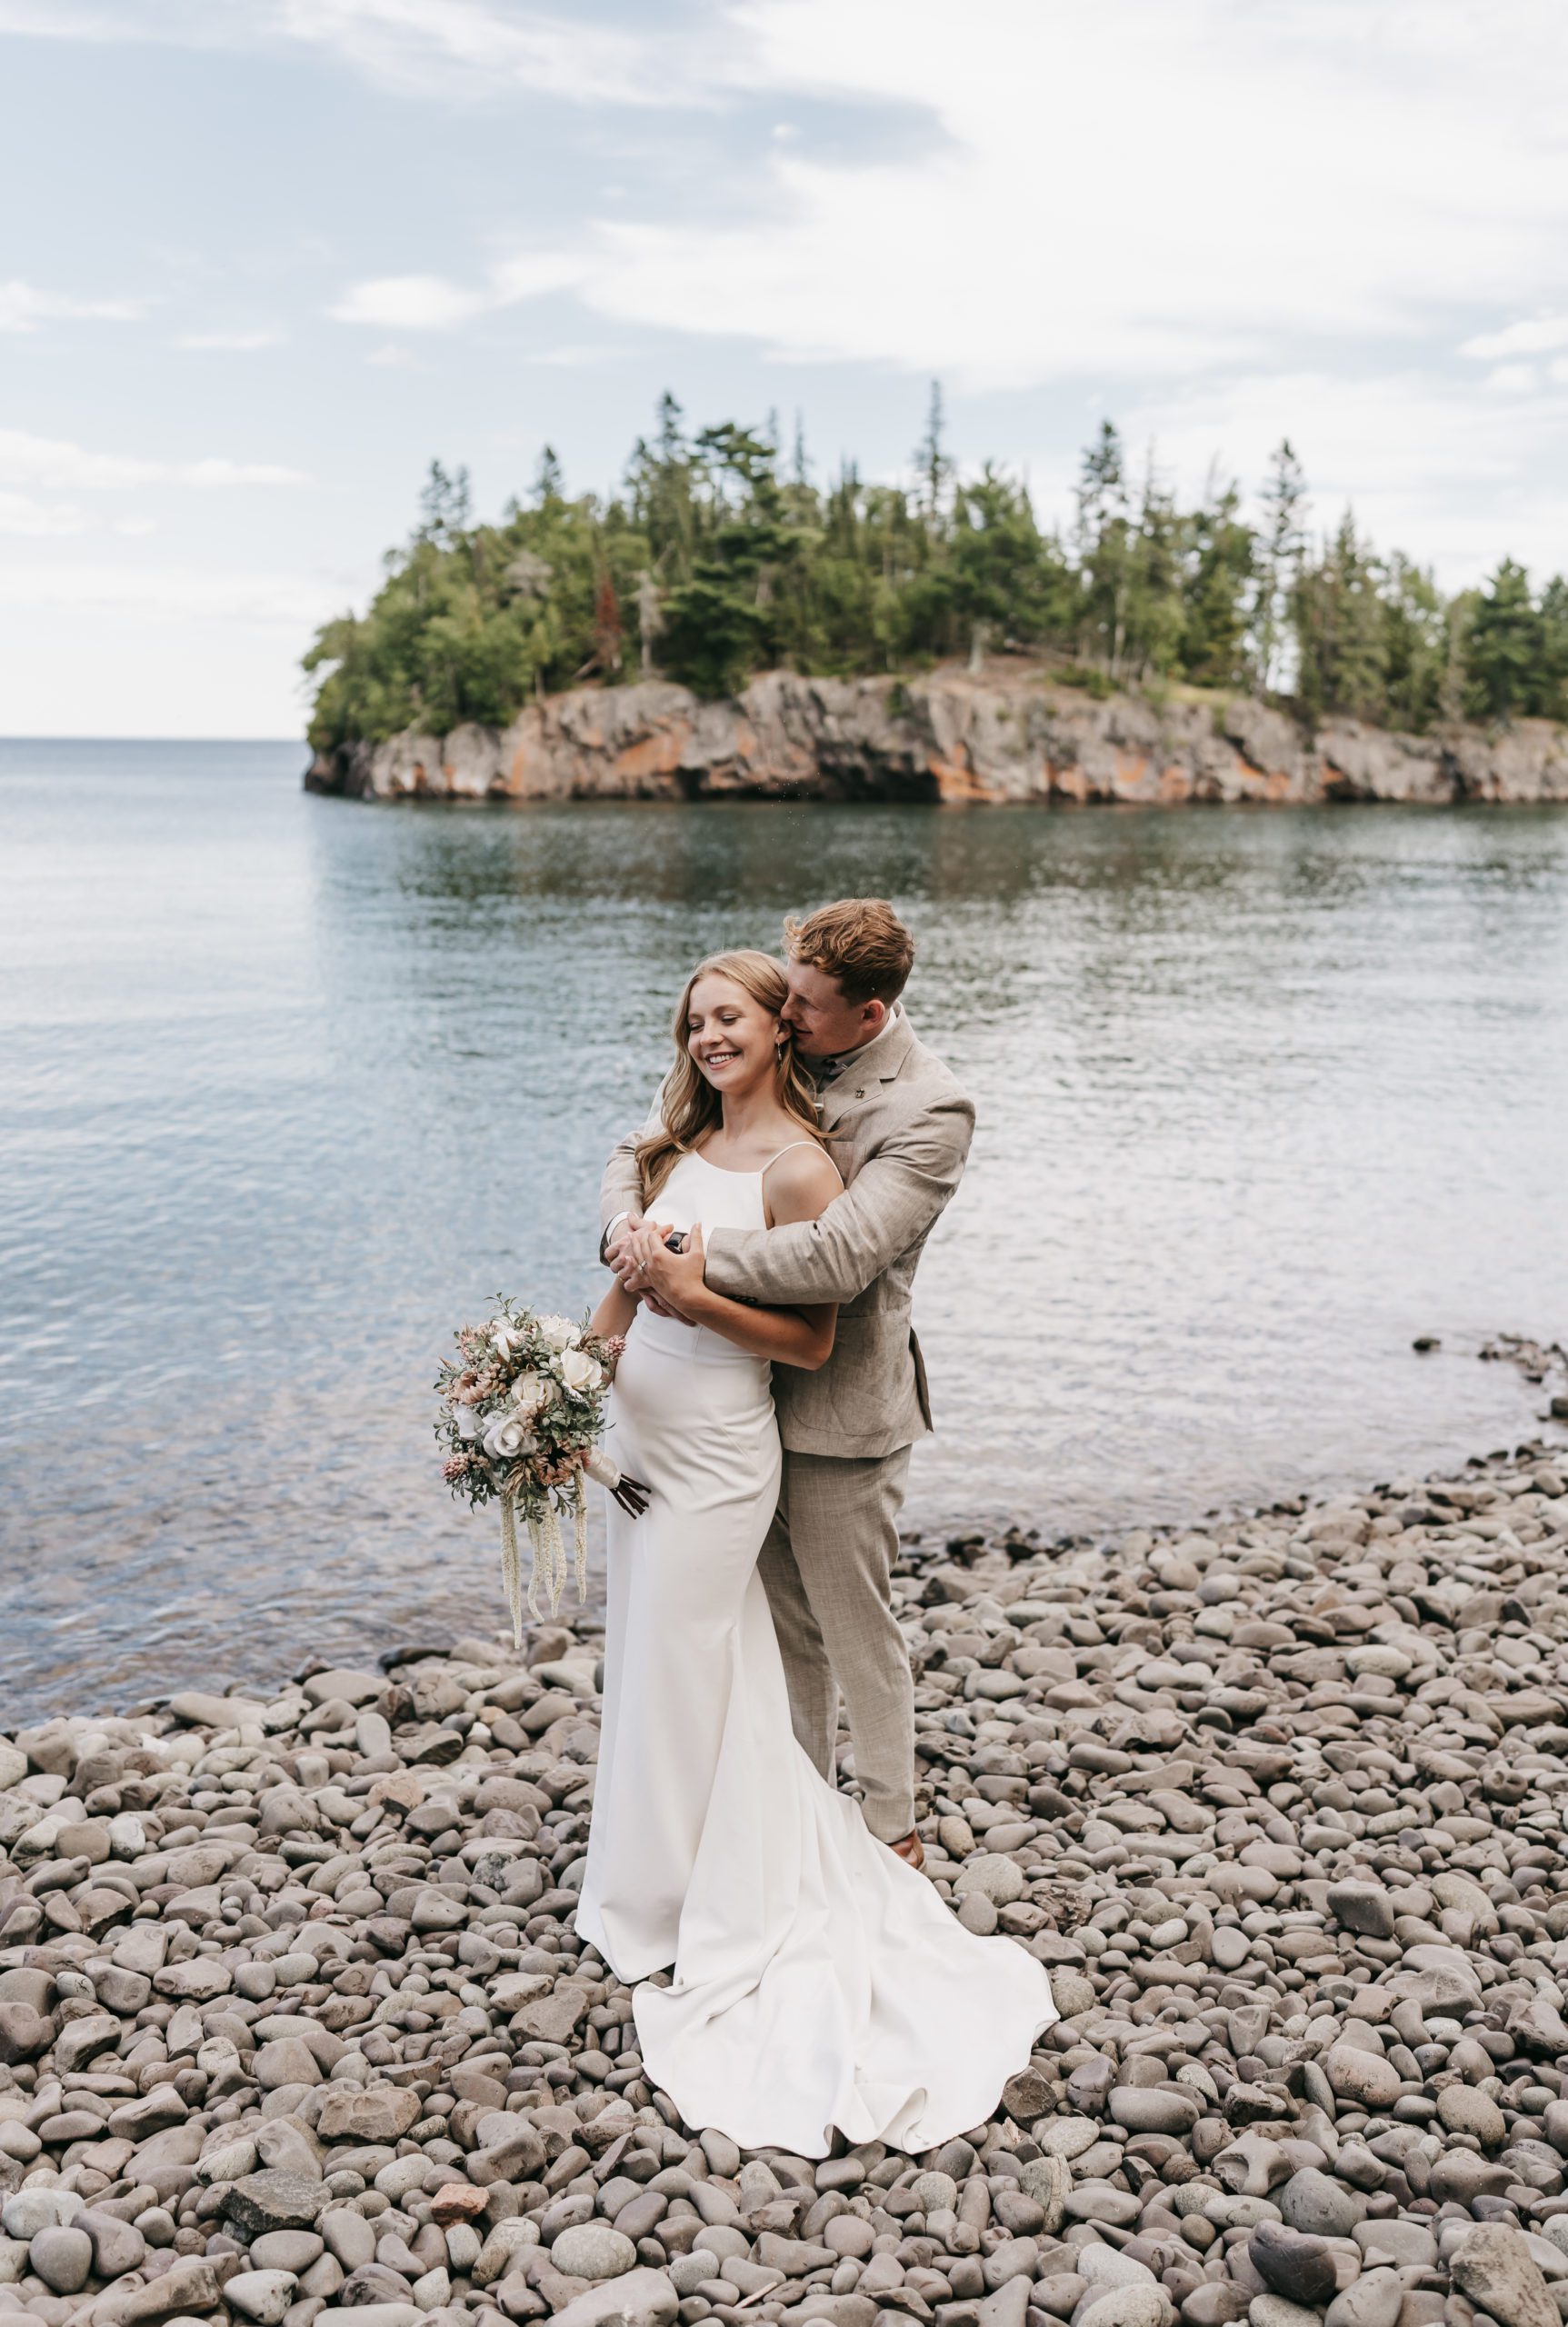 How to Choose an Elopement Location